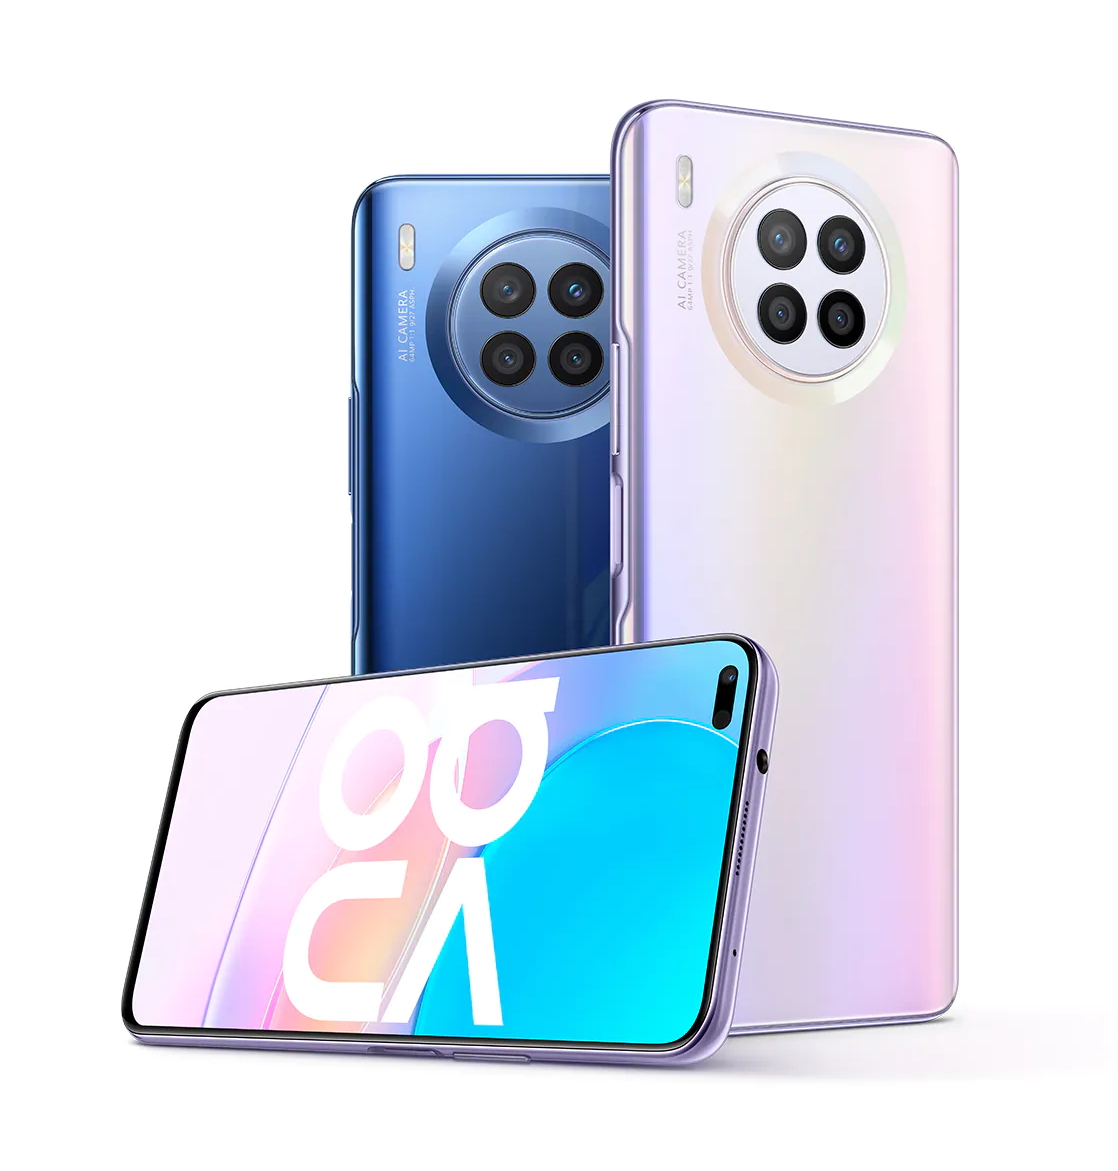 Blozend Ordelijk Samenhangend Huawei nova 8i launched with Mate 30 series looks and a Snapdragon 662 SoC  - NotebookCheck.net News